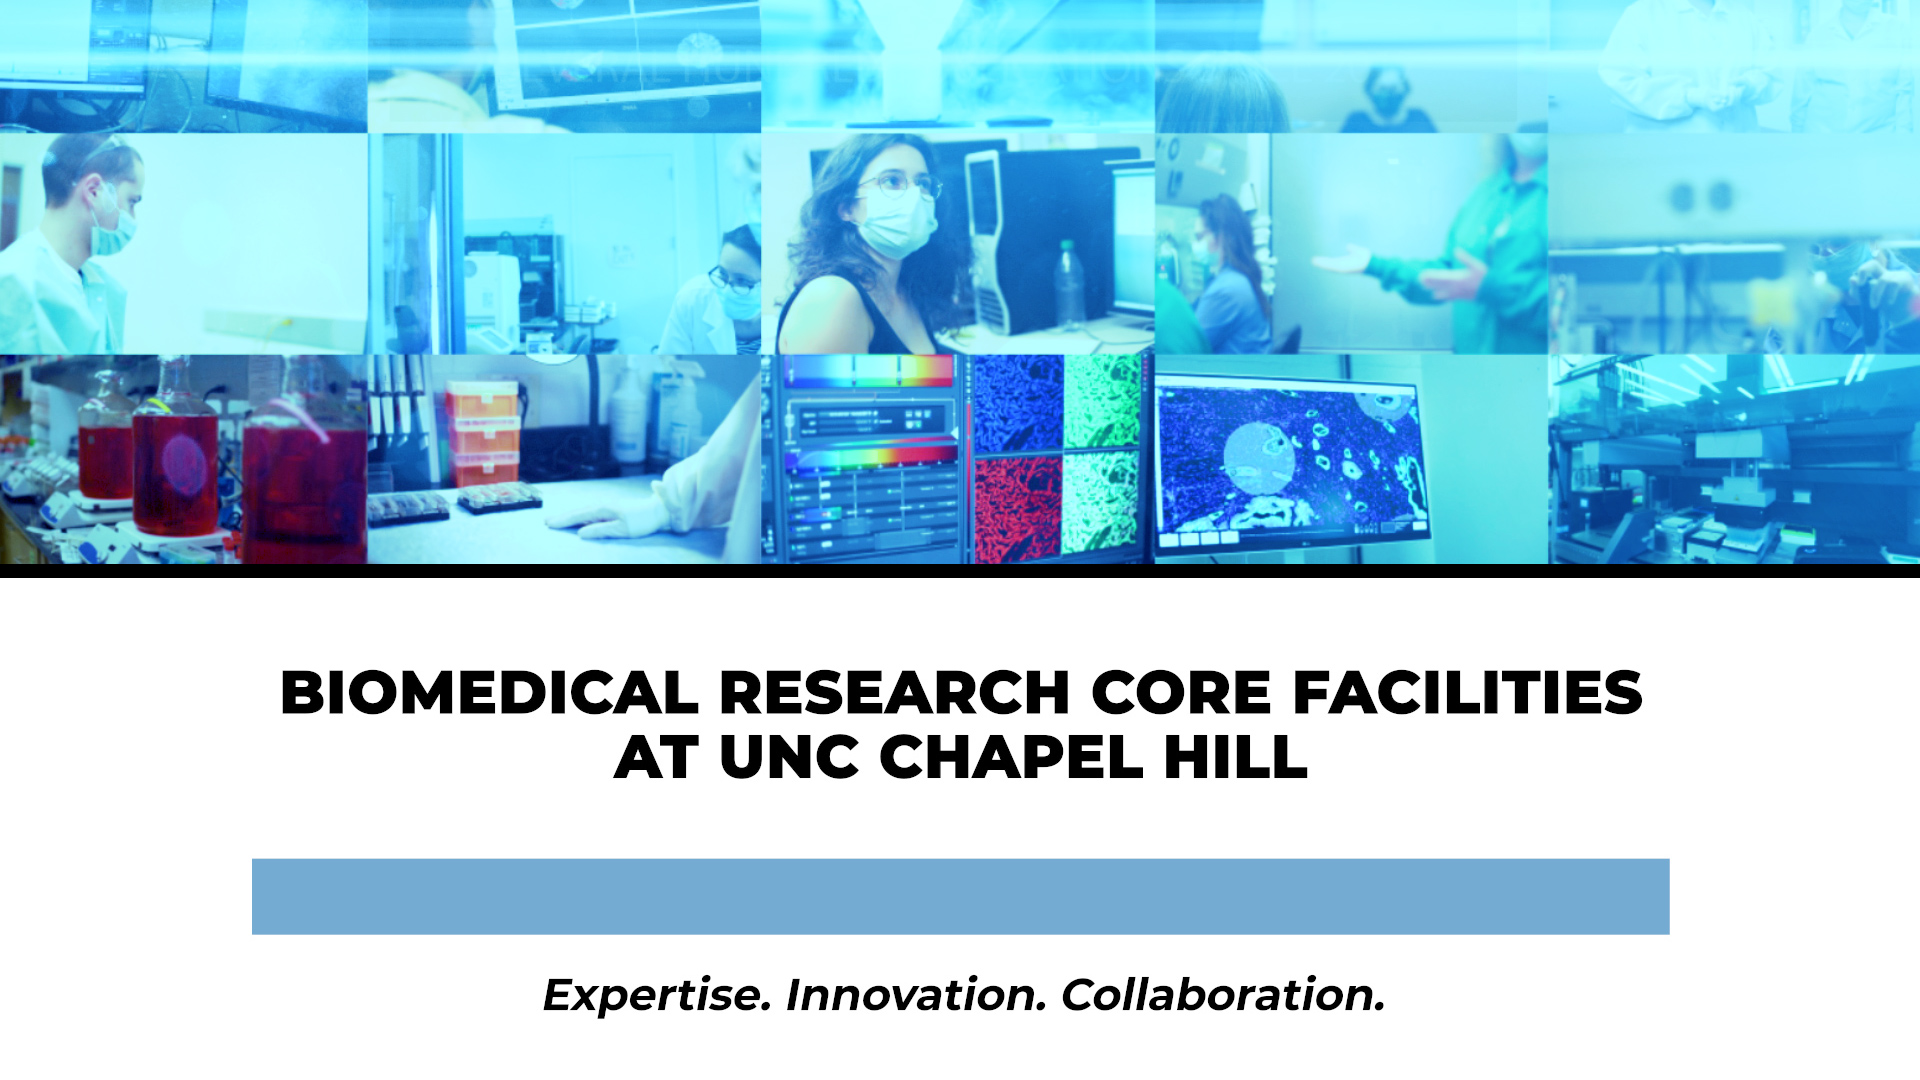 A spotlight video on the biomedical research core facilities at UNC Chapel Hill